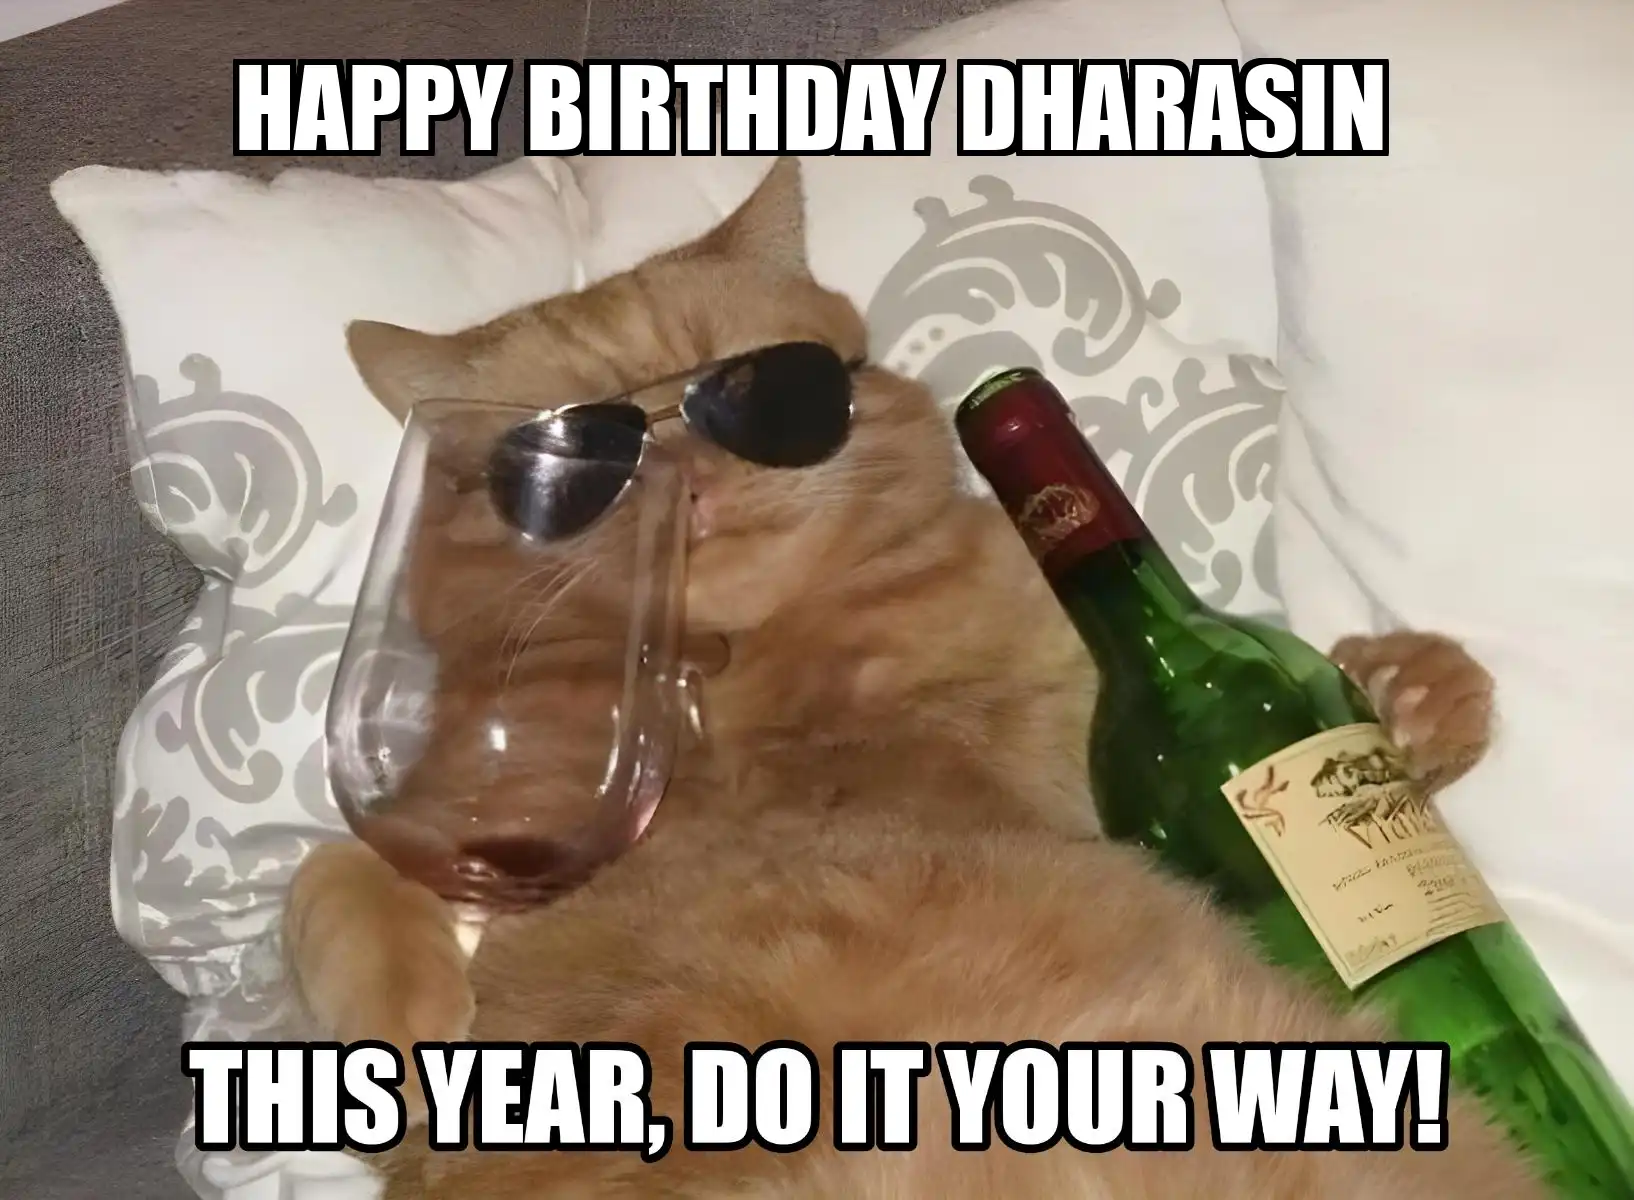 Happy Birthday Dharasin This Year Do It Your Way Meme